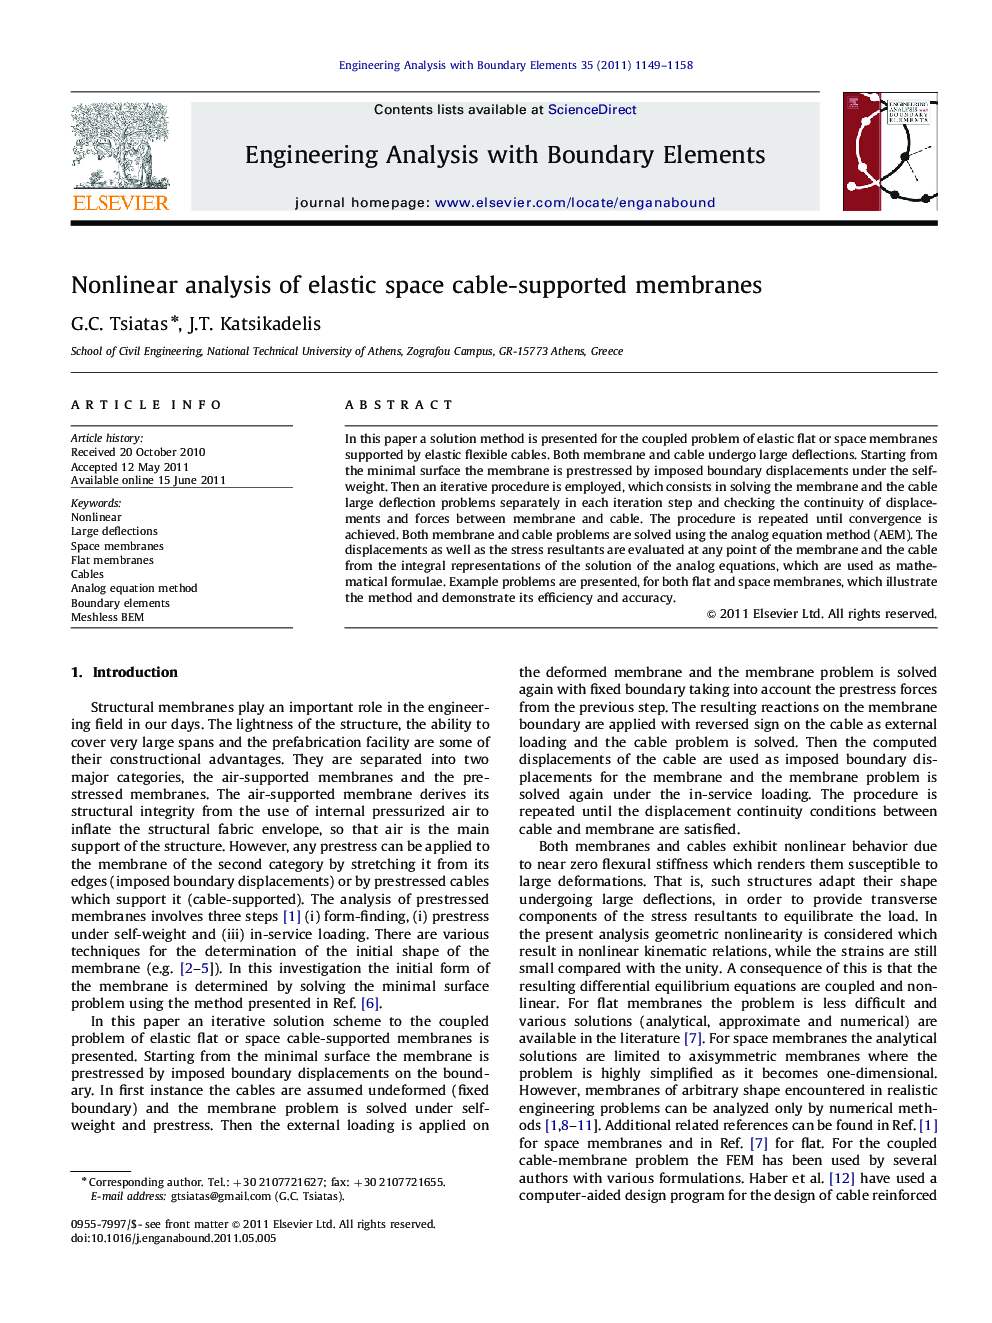 Nonlinear analysis of elastic space cable-supported membranes